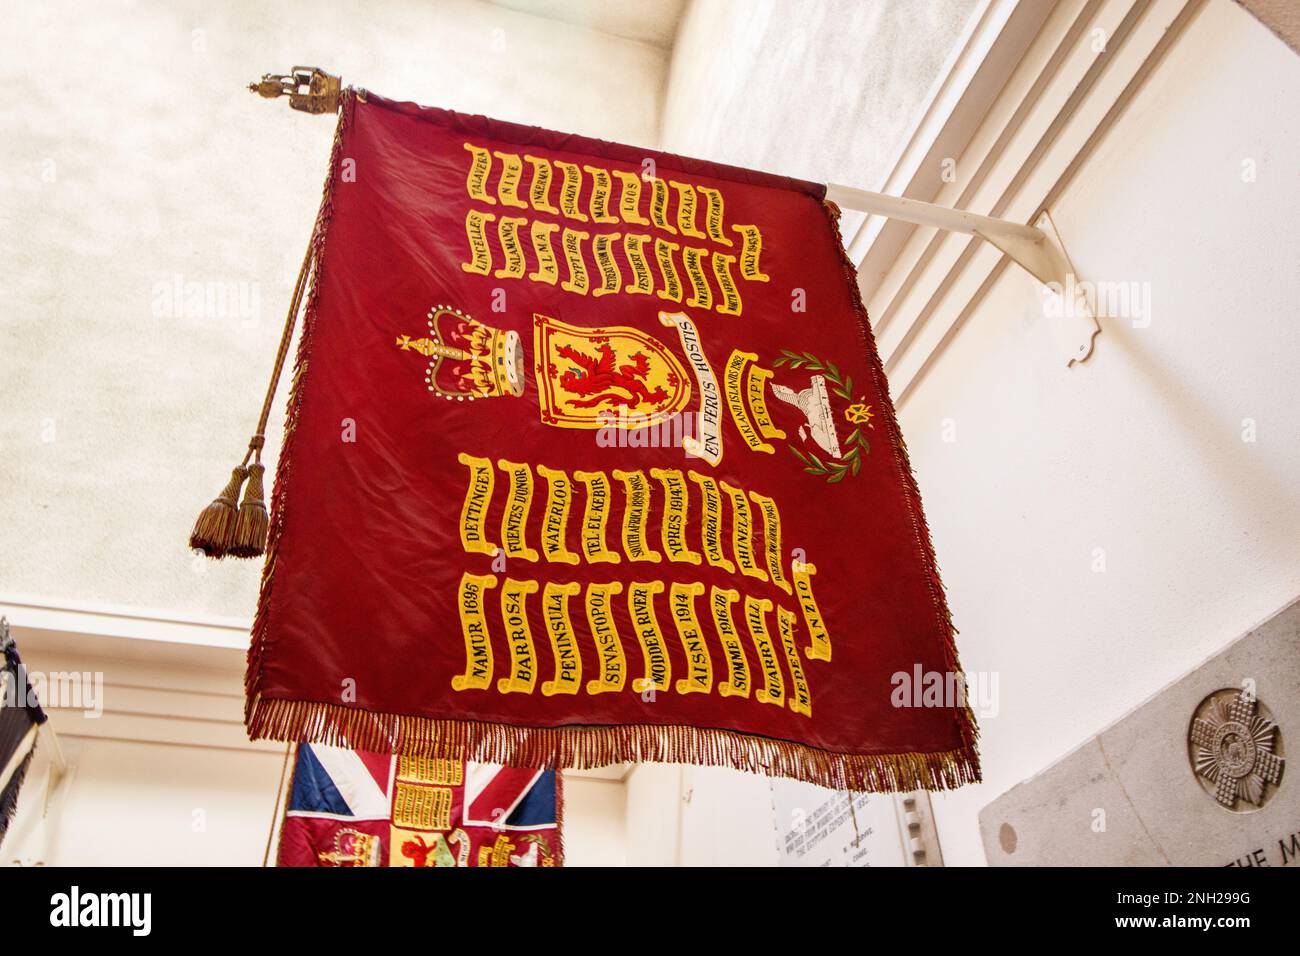 St Columba's Church is one of the two London congregations of the Church of Scotland. Pictured, a regimental flag of the London Scottish regiment bearing campaigns. The flag is situated in a small chapel in the church Stock Photo